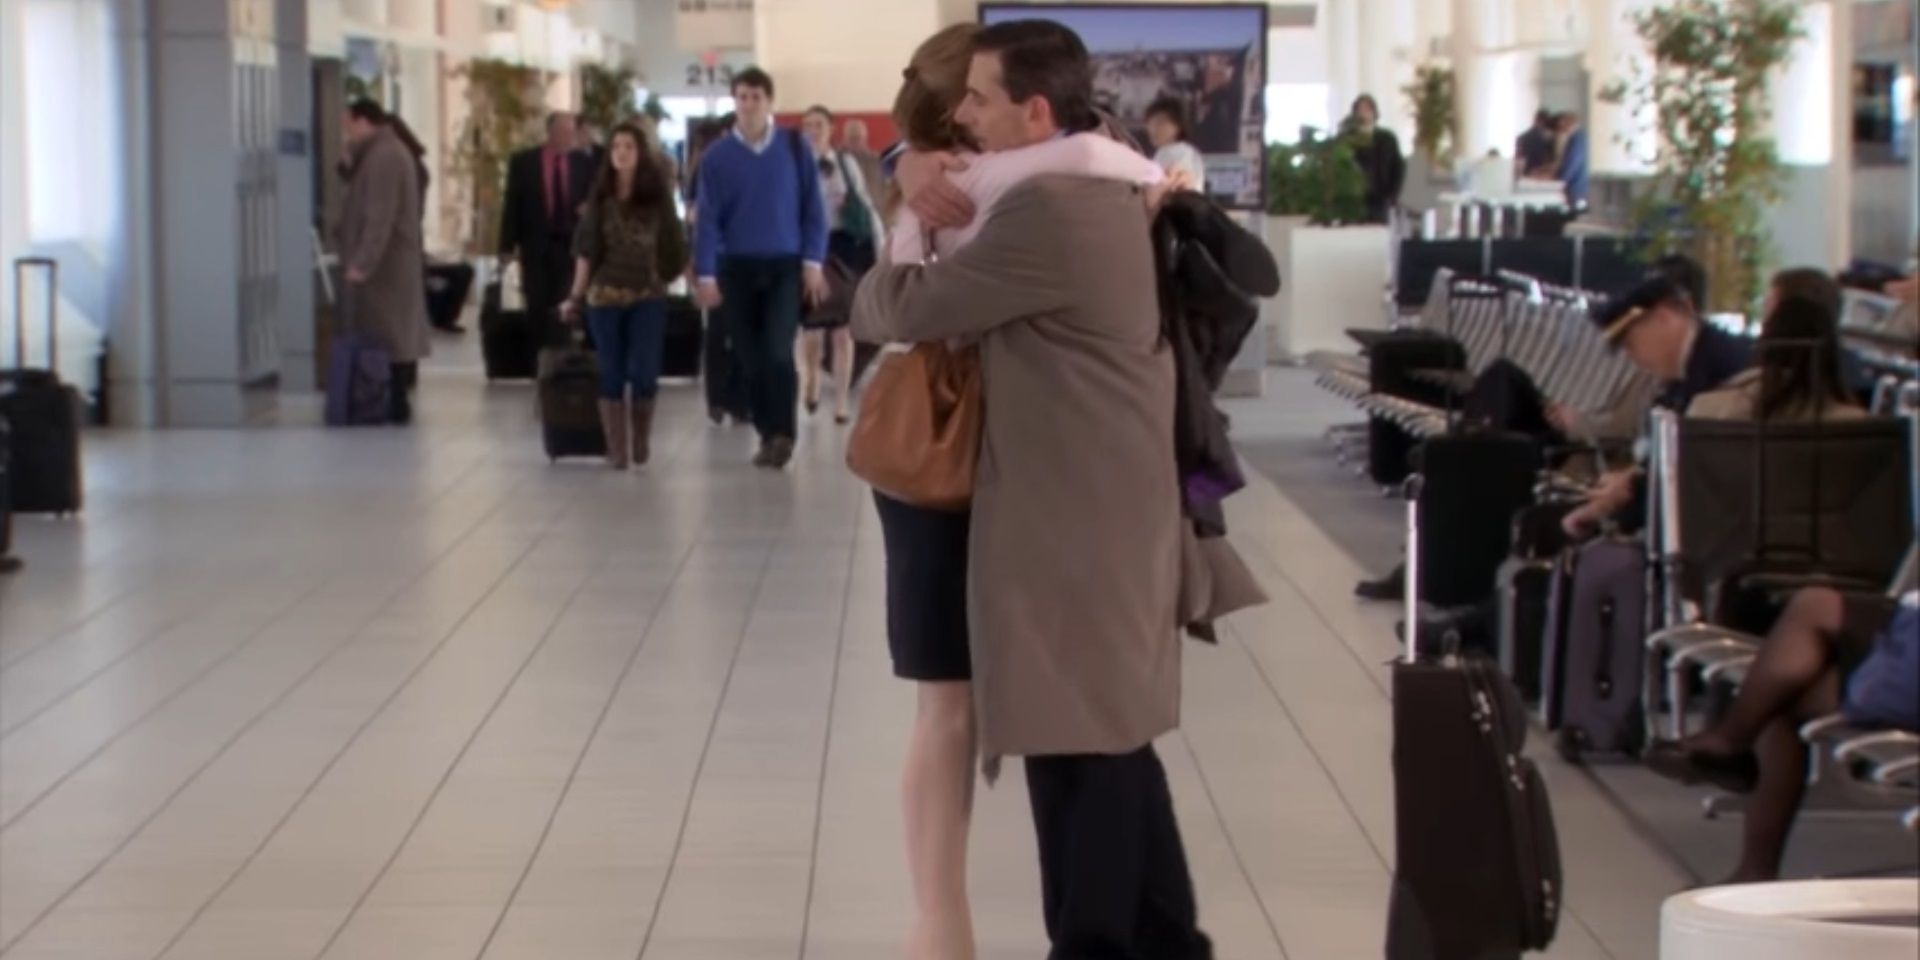 Pam and Michael hug before he leaves on his flight in The Office